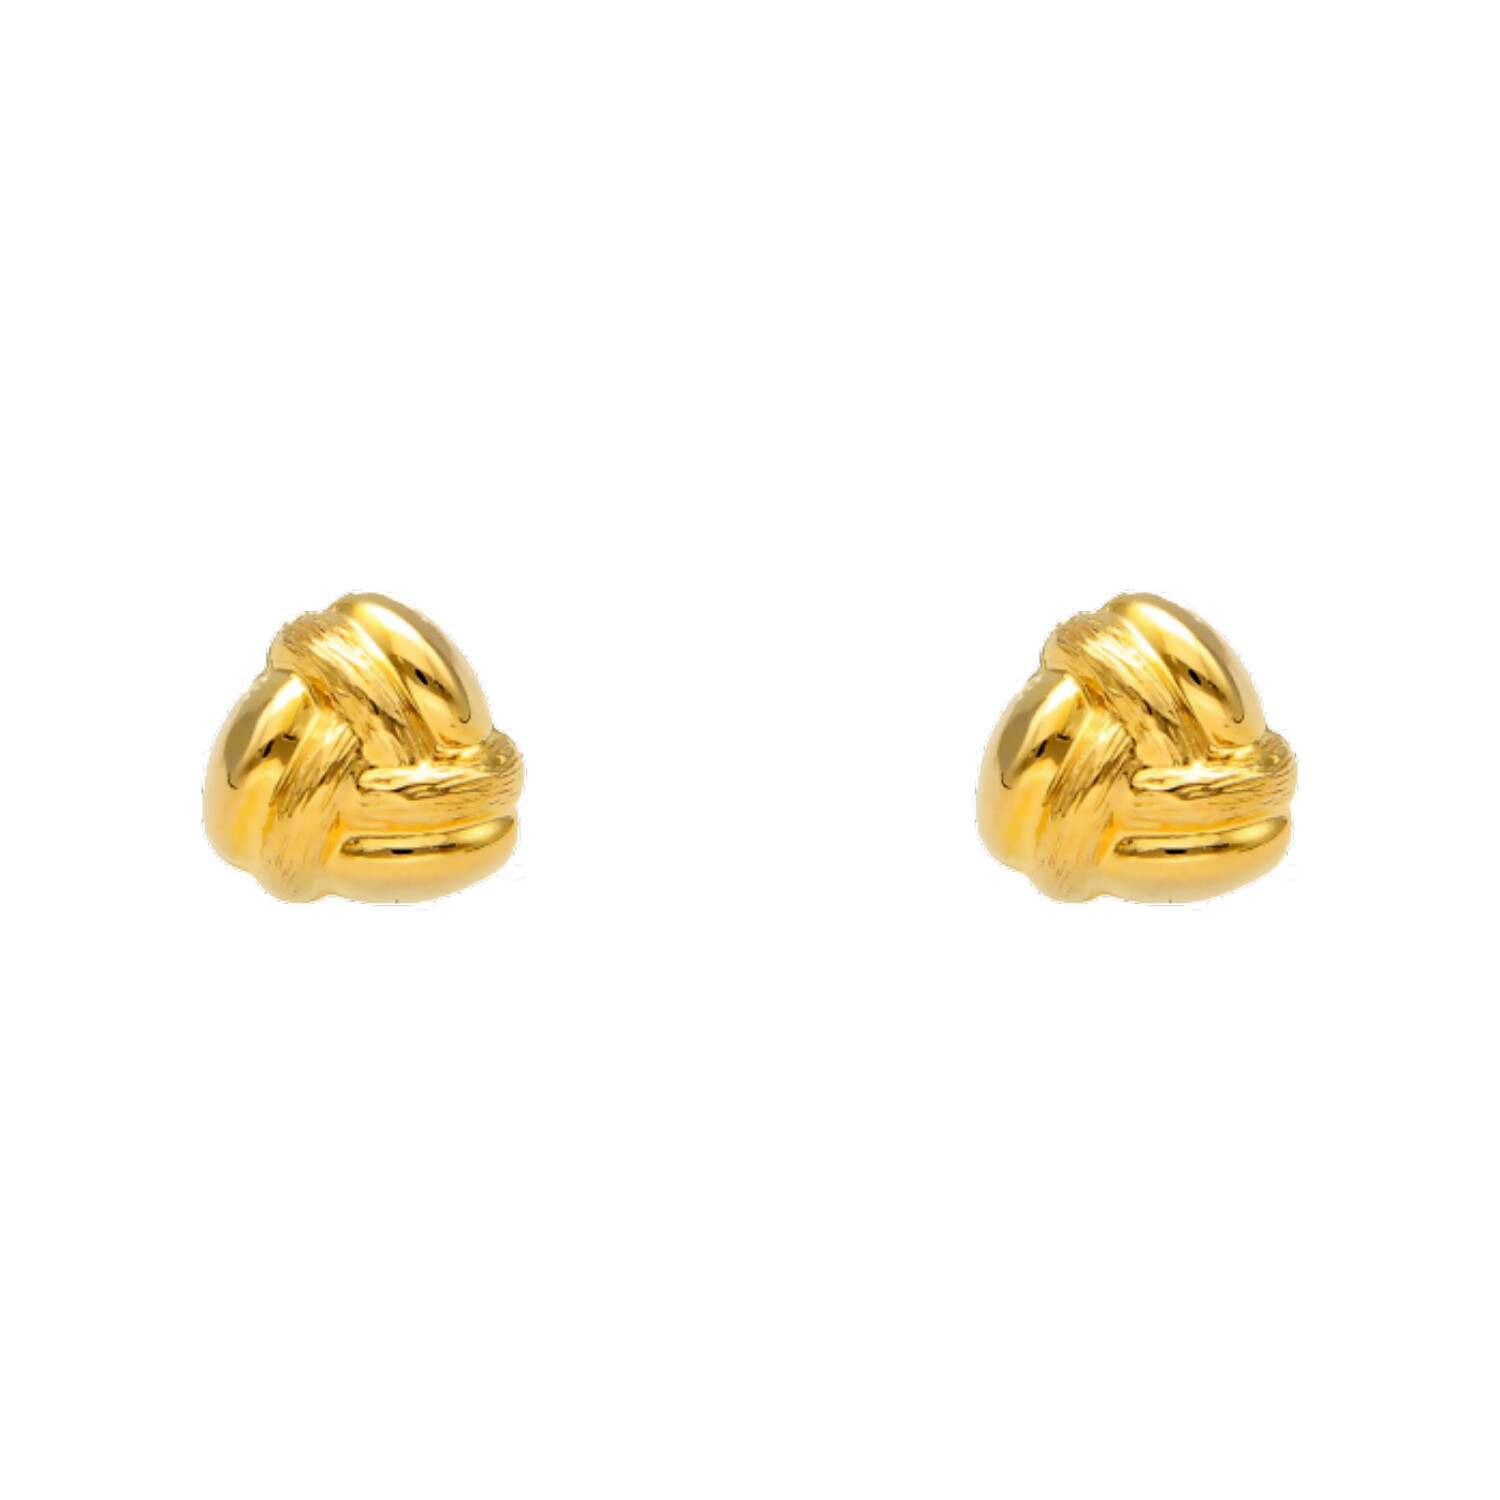 Yellow gold knot earrings